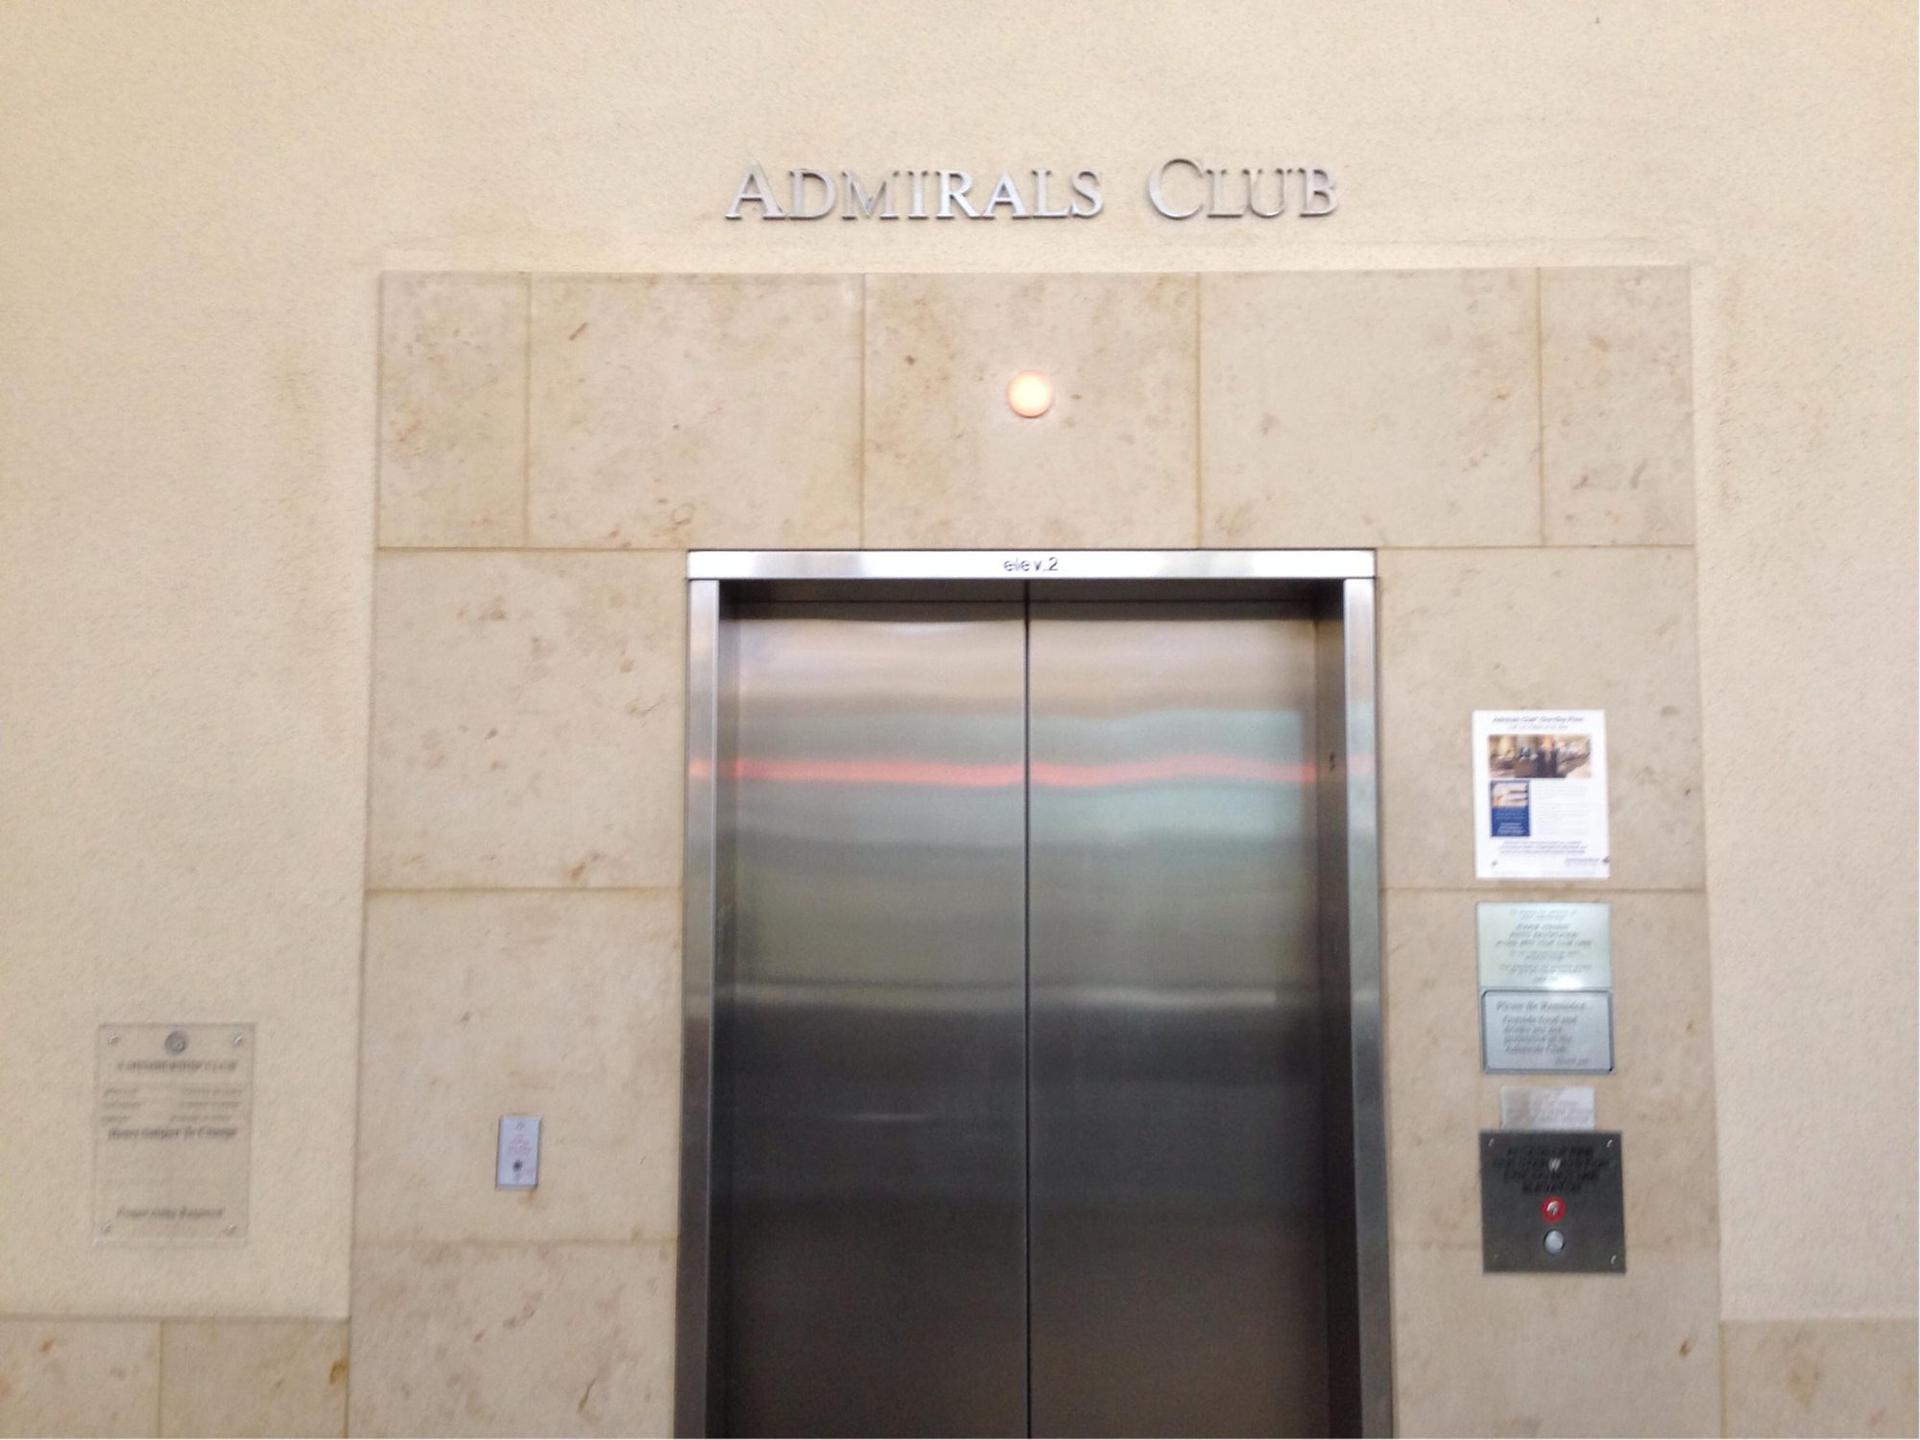 American Airlines Admirals Club image 3 of 12